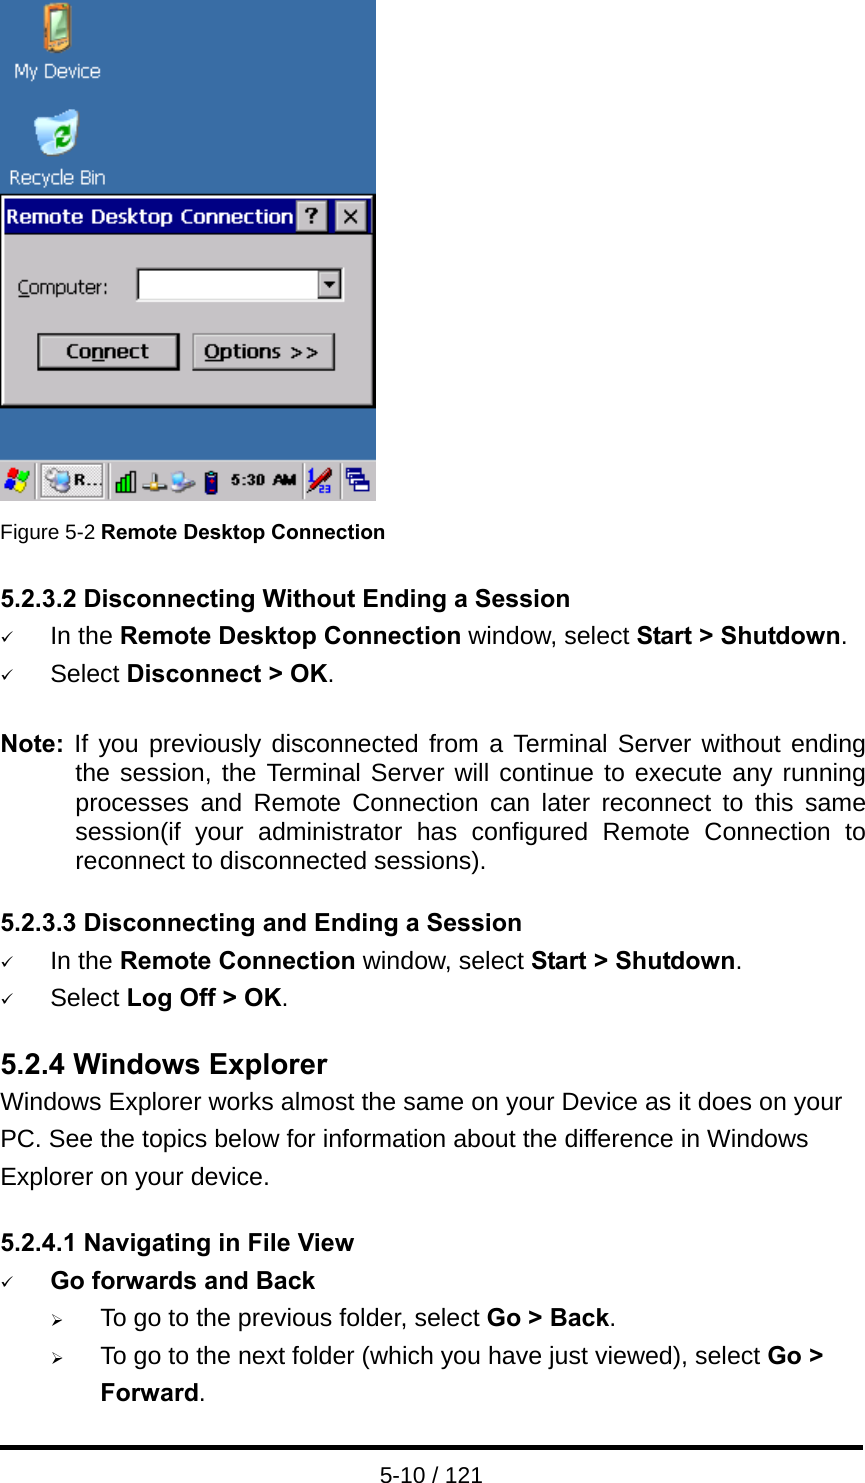  5-10 / 121  Figure 5-2 Remote Desktop Connection  5.2.3.2 Disconnecting Without Ending a Session 9 In the Remote Desktop Connection window, select Start &gt; Shutdown. 9 Select Disconnect &gt; OK.  Note:  If you previously disconnected from a Terminal Server without ending the session, the Terminal Server will continue to execute any running processes and Remote Connection can later reconnect to this same session(if your administrator has configured Remote Connection to reconnect to disconnected sessions).  5.2.3.3 Disconnecting and Ending a Session 9 In the Remote Connection window, select Start &gt; Shutdown. 9 Select Log Off &gt; OK.  5.2.4 Windows Explorer Windows Explorer works almost the same on your Device as it does on your PC. See the topics below for information about the difference in Windows Explorer on your device.  5.2.4.1 Navigating in File View 9 Go forwards and Back ¾ To go to the previous folder, select Go &gt; Back. ¾ To go to the next folder (which you have just viewed), select Go &gt; Forward. 